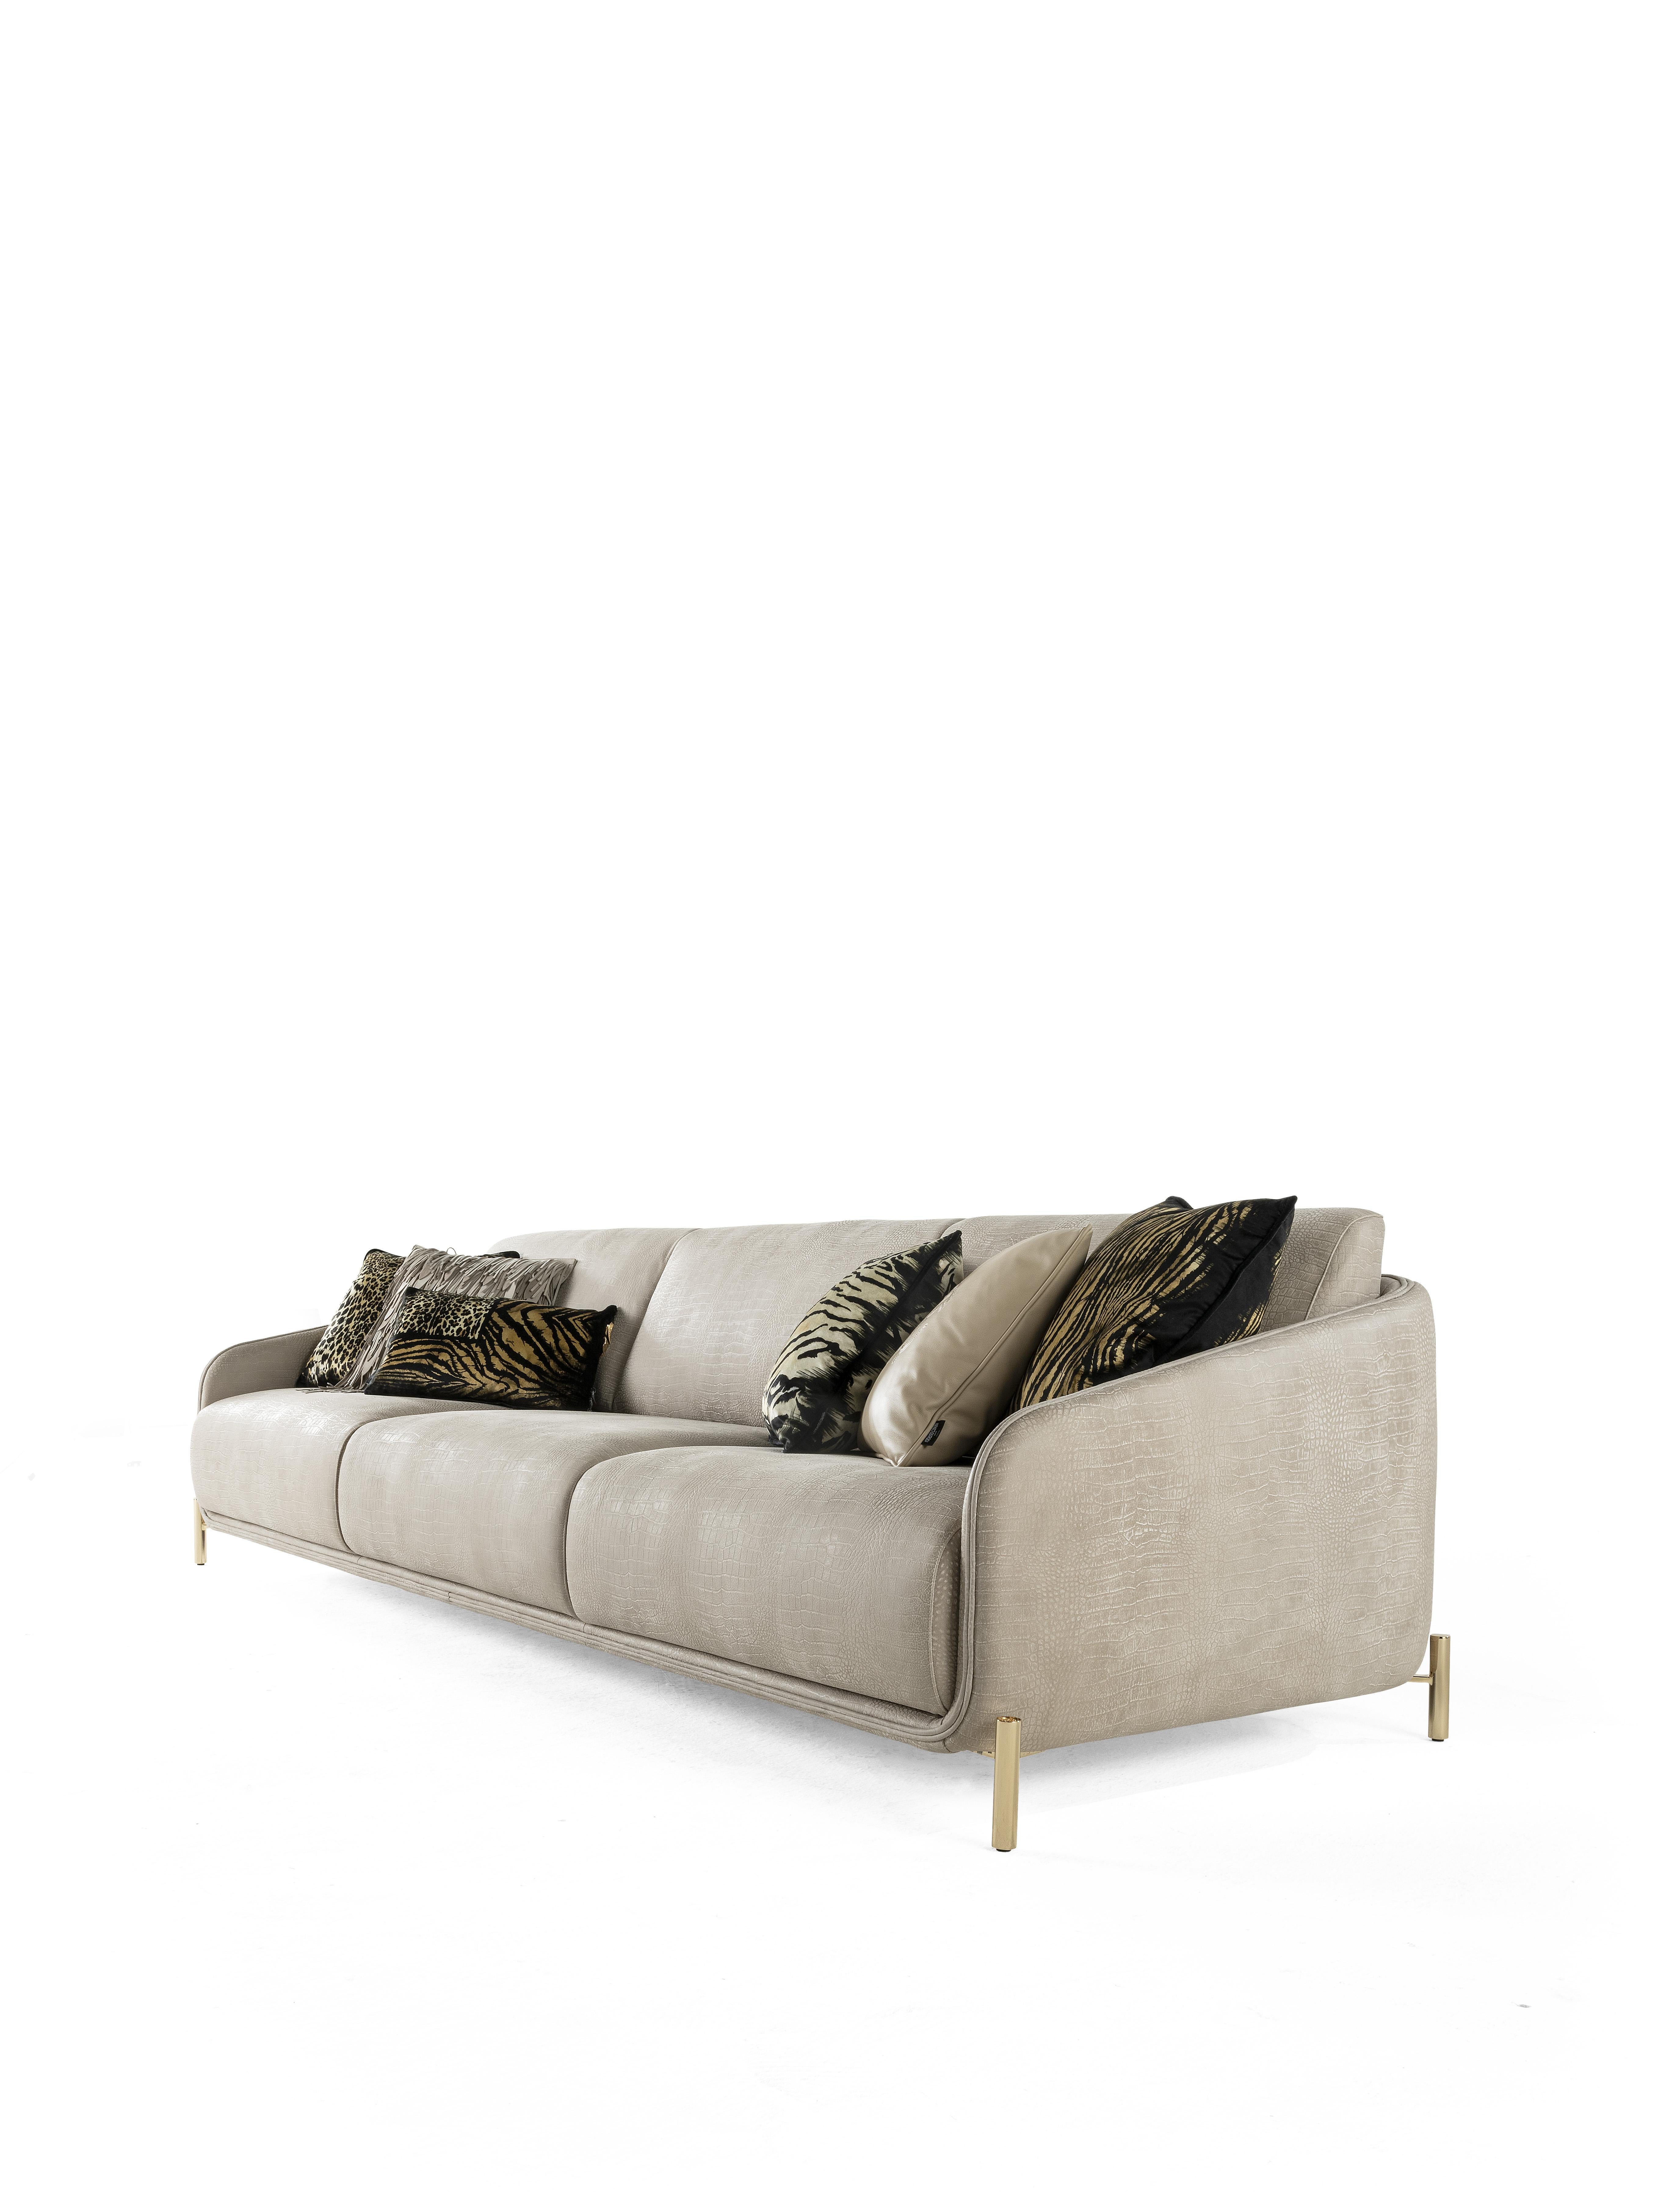 A one-of-a-kind, sensual sofa - the perfect expression of the true essence of the brand. Upholstered in a new textural and luxurious fabric, the sofa is enriched with cushions with animalier patterns, that wink at the wildest spirit of Roberto